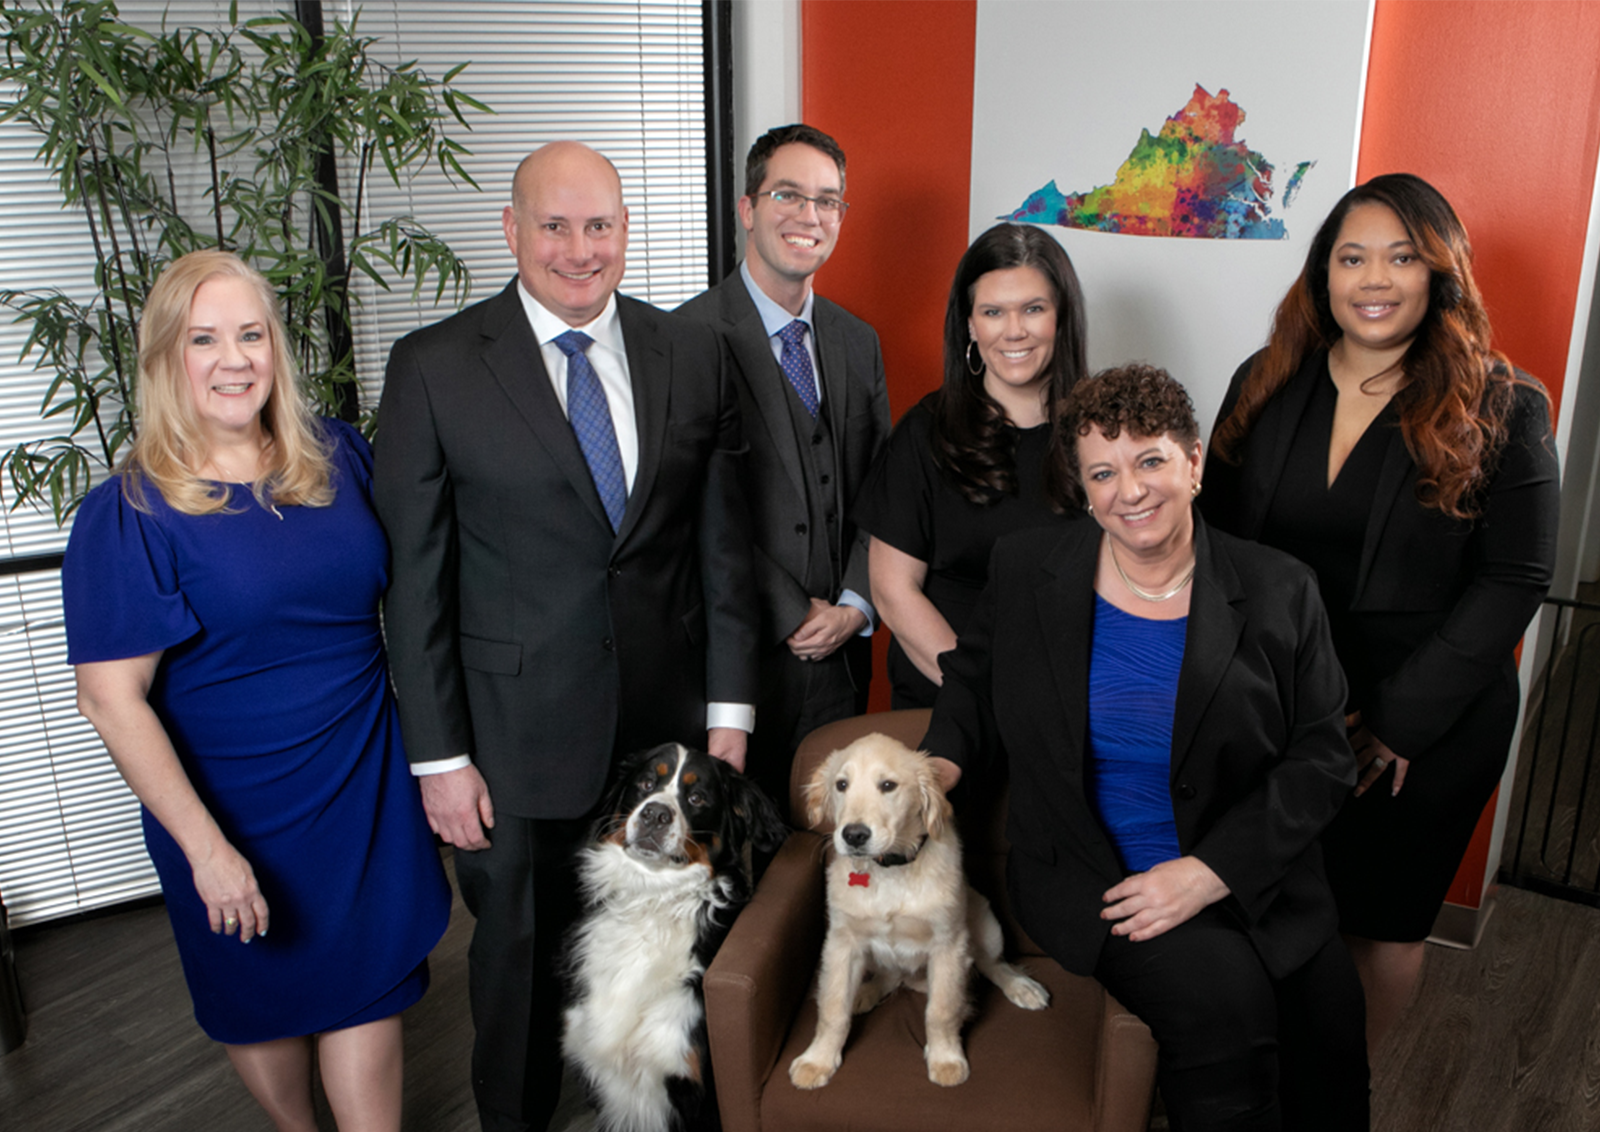 Group photo of firm attorneys and staff